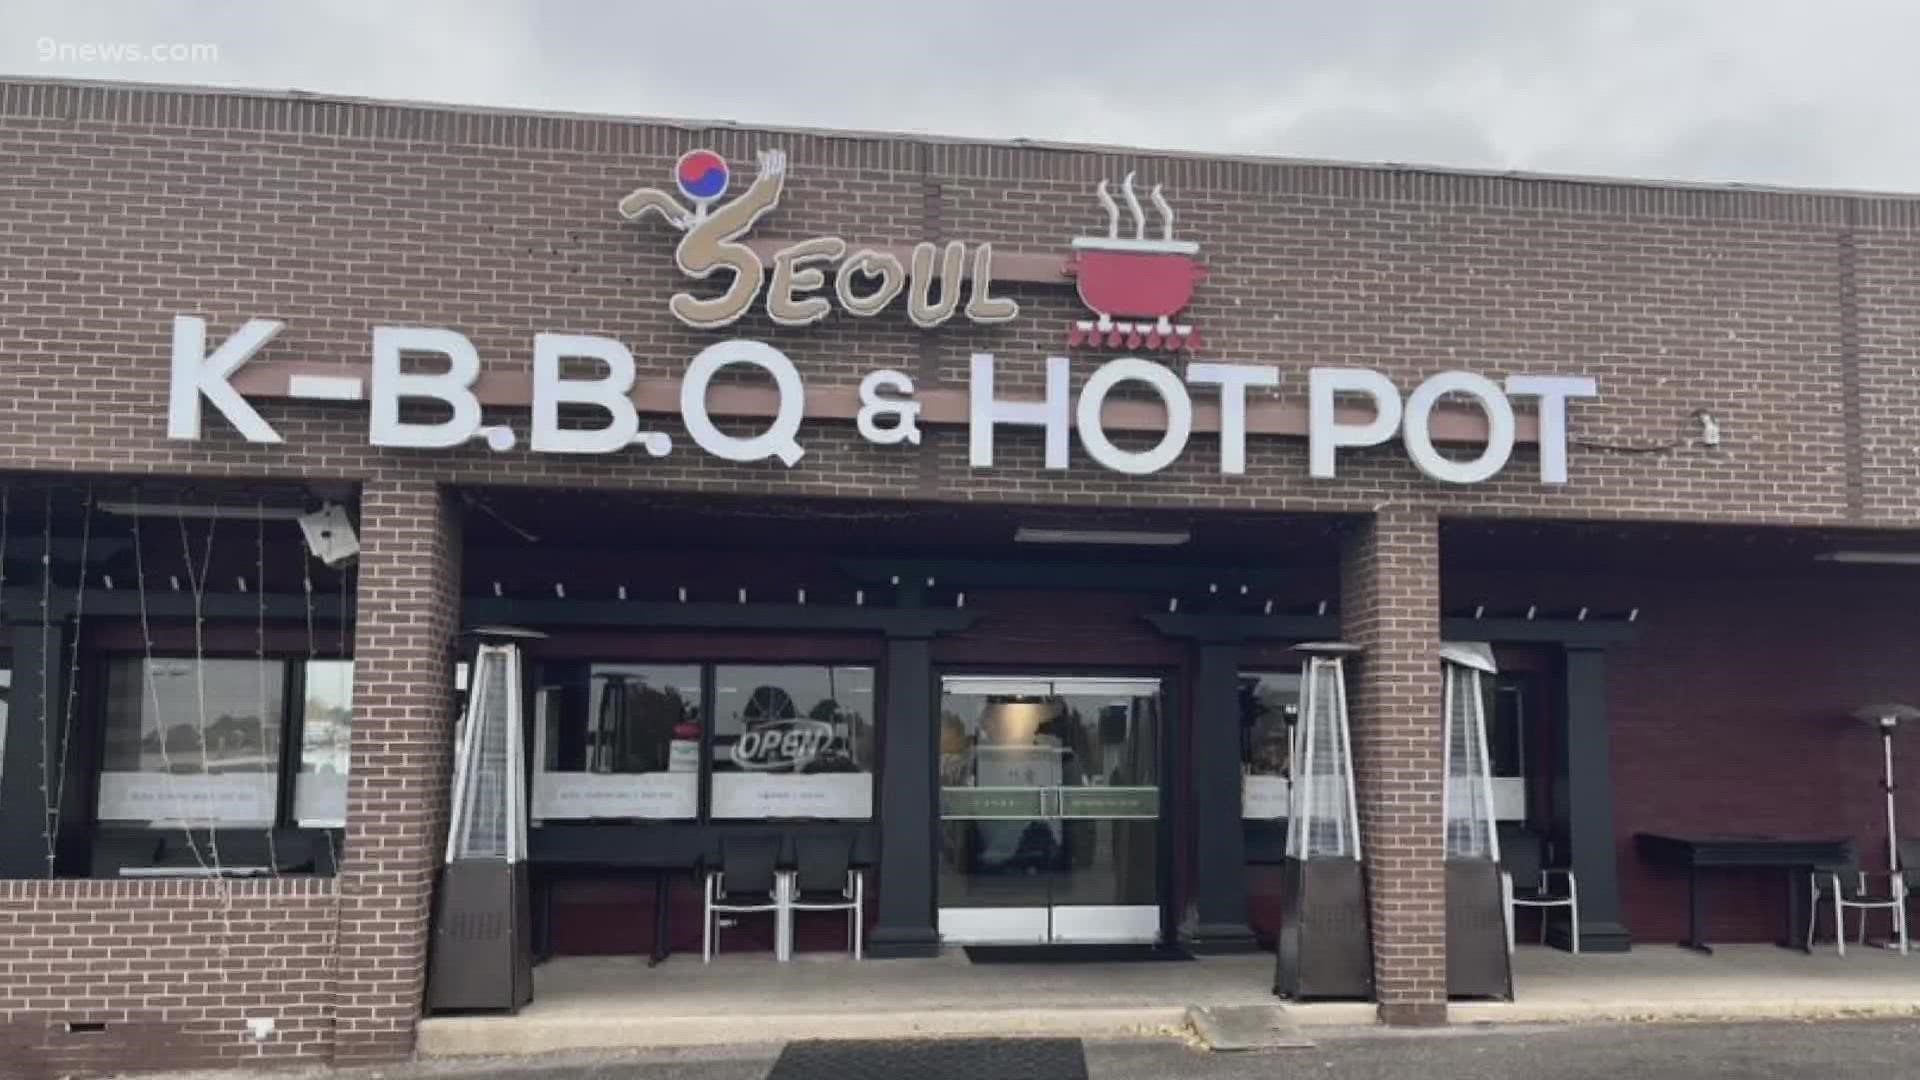 Ryan Frazier talks with LW Lee, owner of Seoul BBQ and Hot Pot, about how the Korean restaurant business is going despite lingering staff and supply shortages.